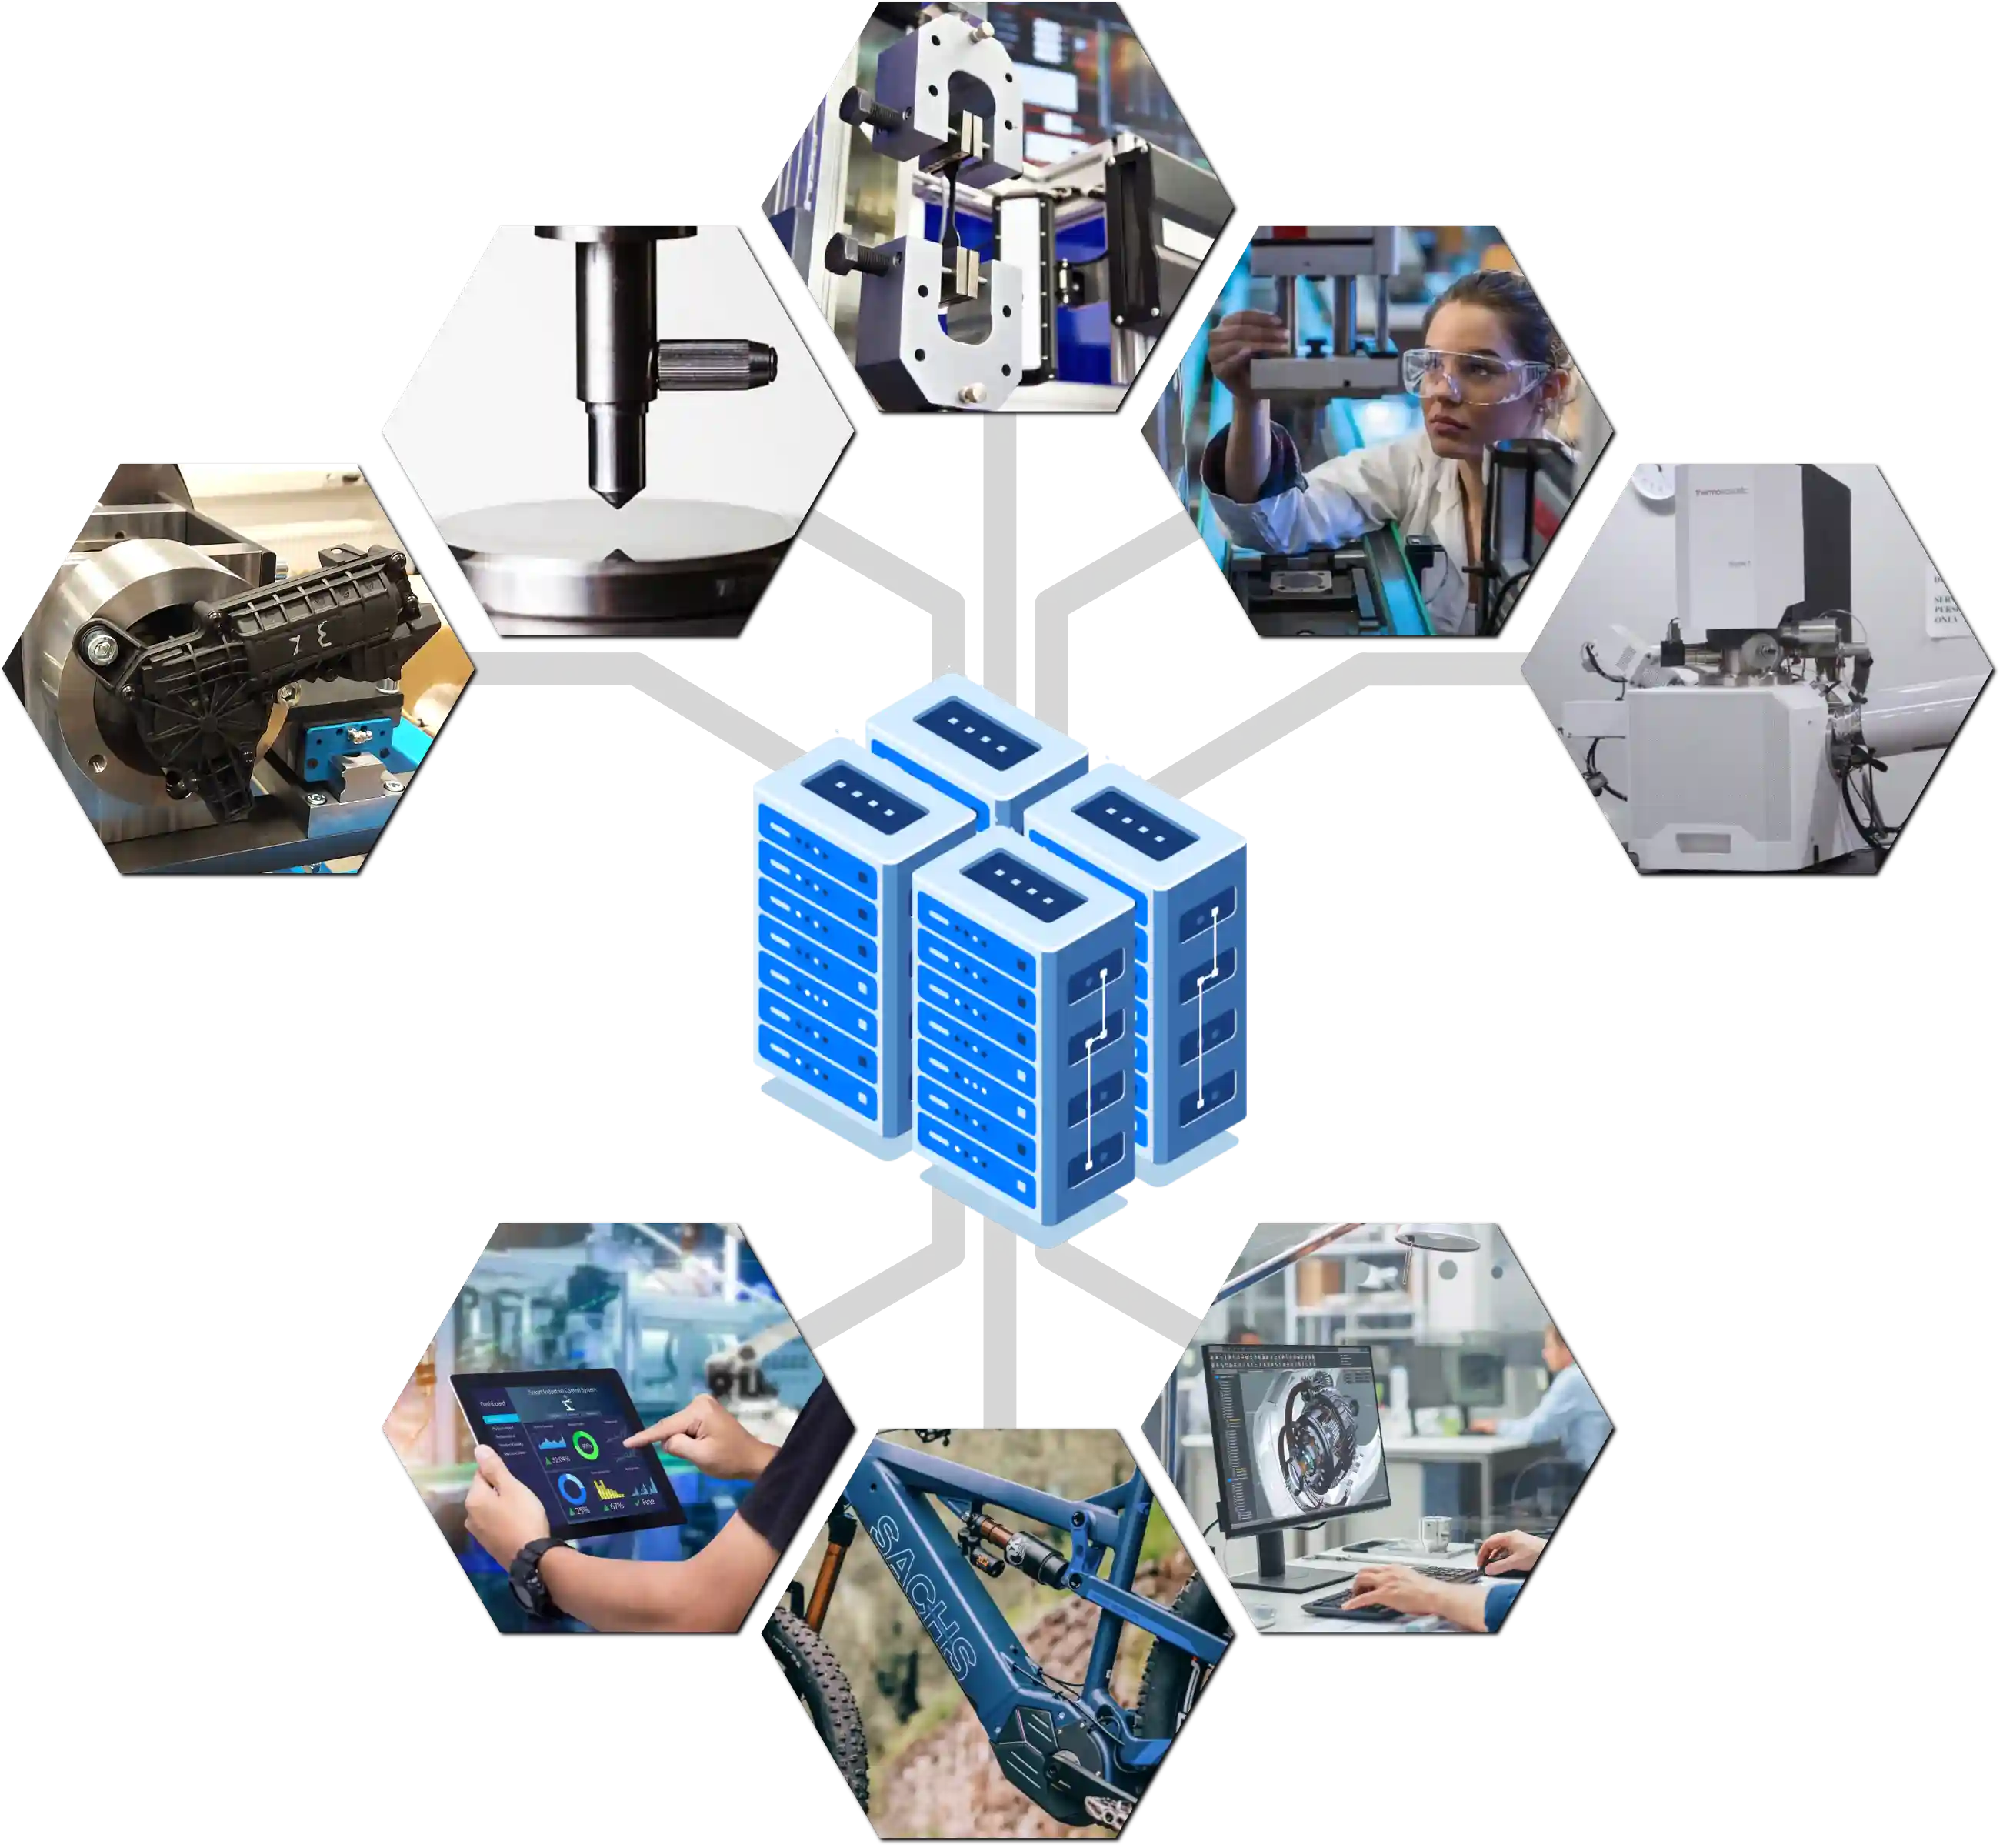 Various testing procedures and engineering design images in hexagon frames and server icon